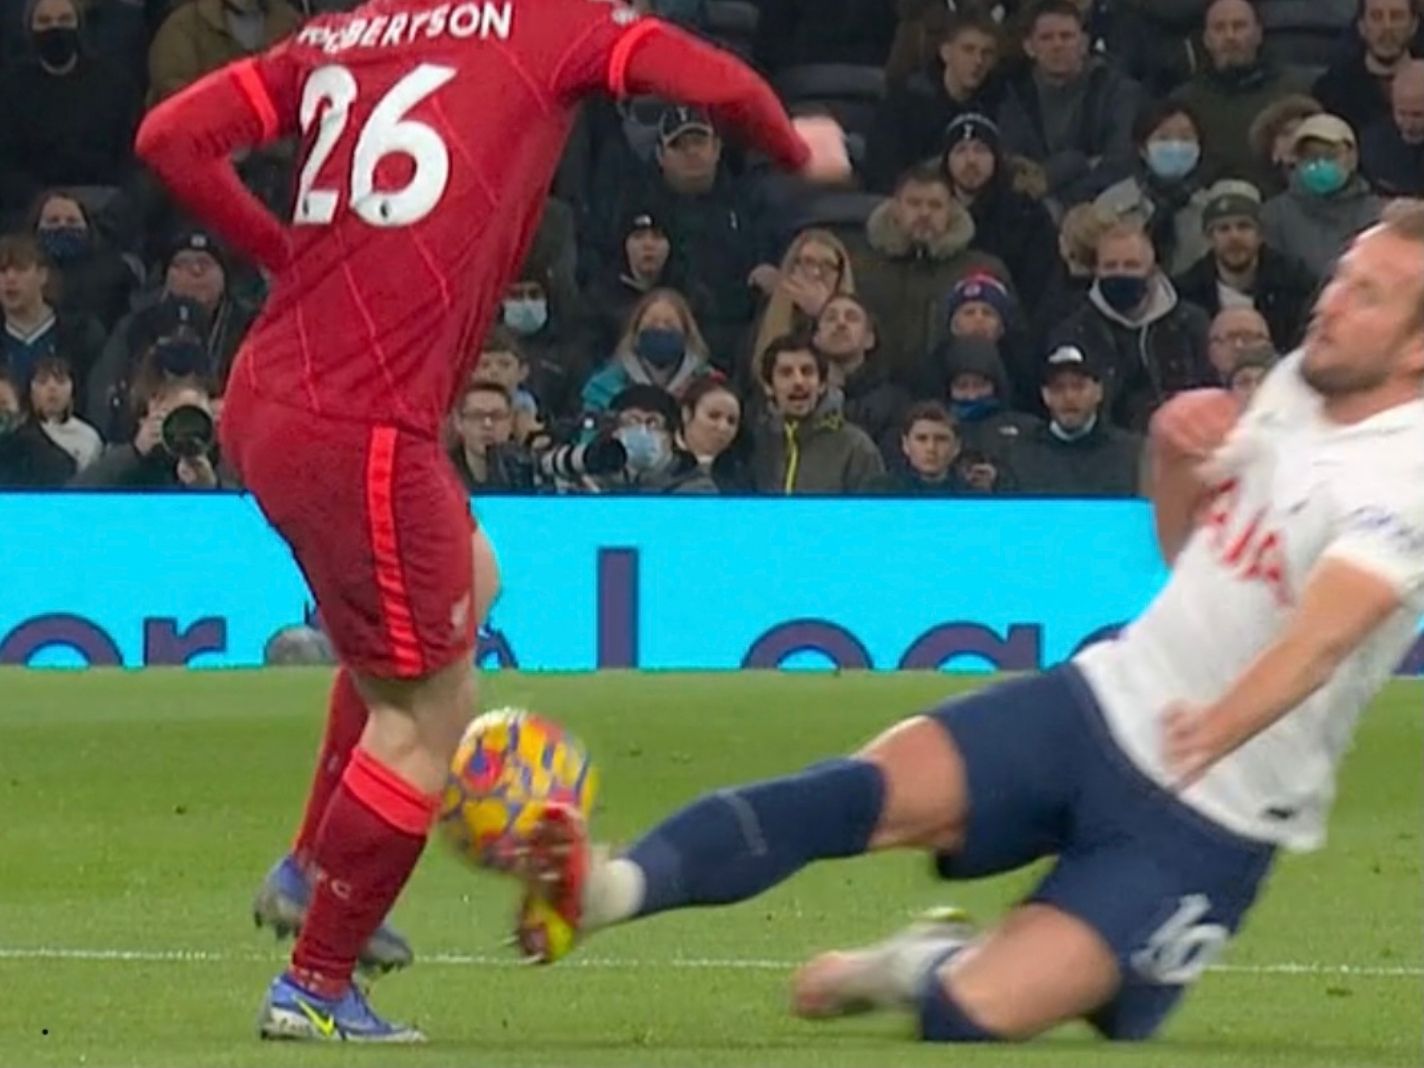 ‘Art when Gerrard does it’ – Twitter calls out hypocrisy over Harry Kane’s tackle